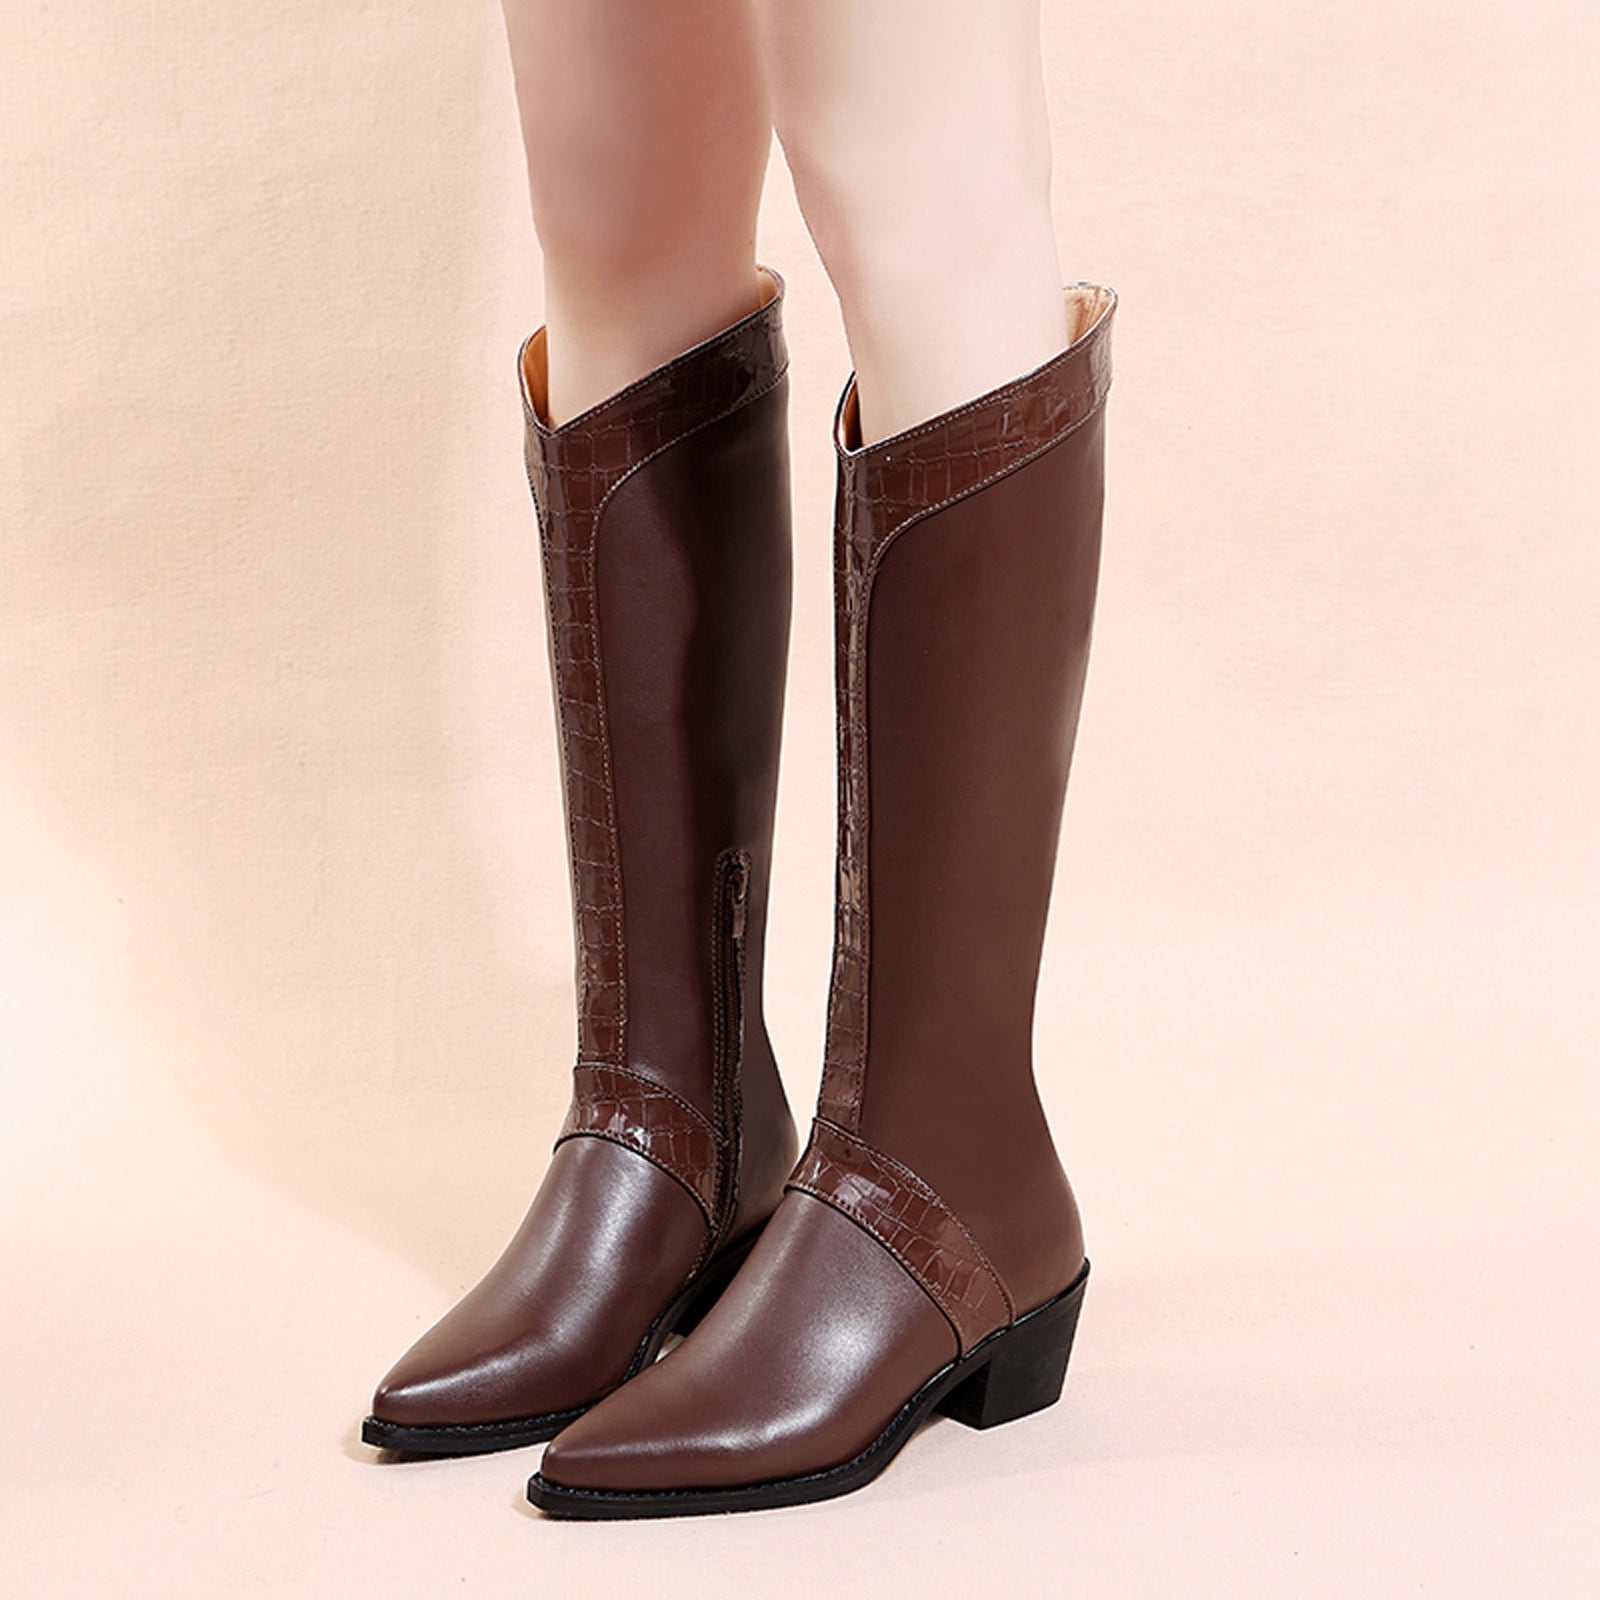 Women's Over Knee High knight Boots Casual Faux Leather Pull On Riding Shoes new